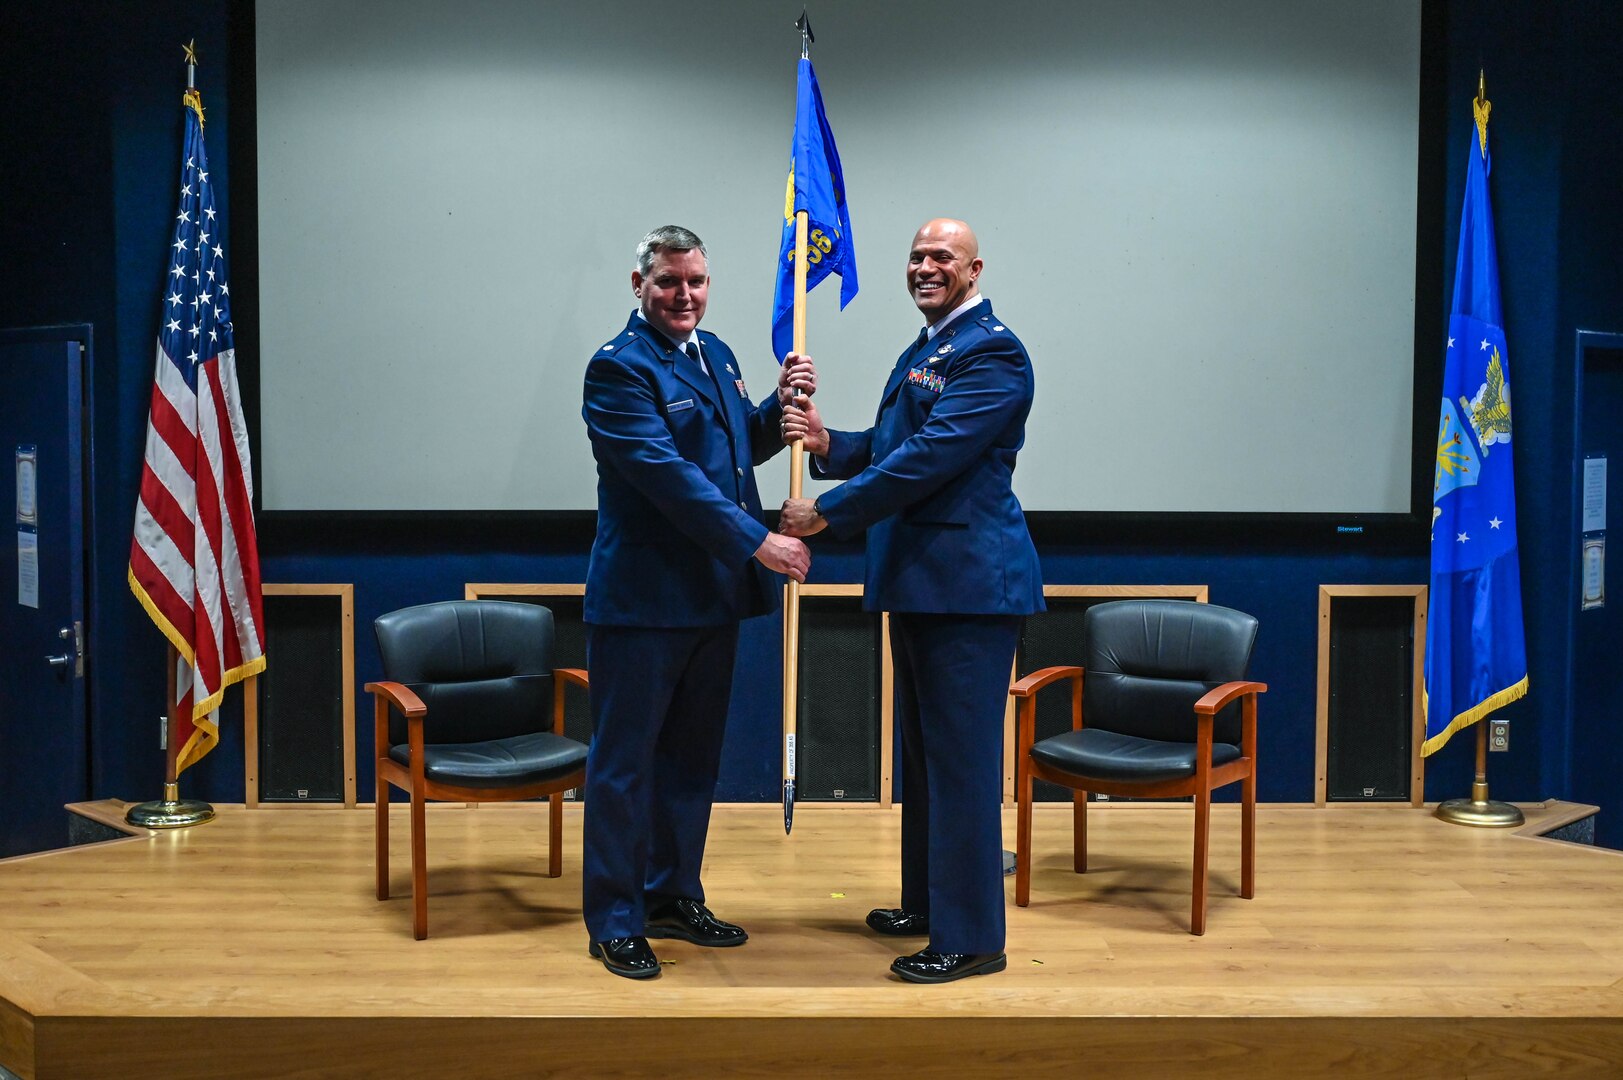 Lt. Col. Matthew Vandewalle, 433rd Operations Group commander, hands the 356th Airlift Squadron guidon to the unit’s new commander, Lt. Col. Christopher Jones, as part of an assumption of command ceremony at Joint Base San Antonio-Lackland, Texas on Jan. 5th, 2024.